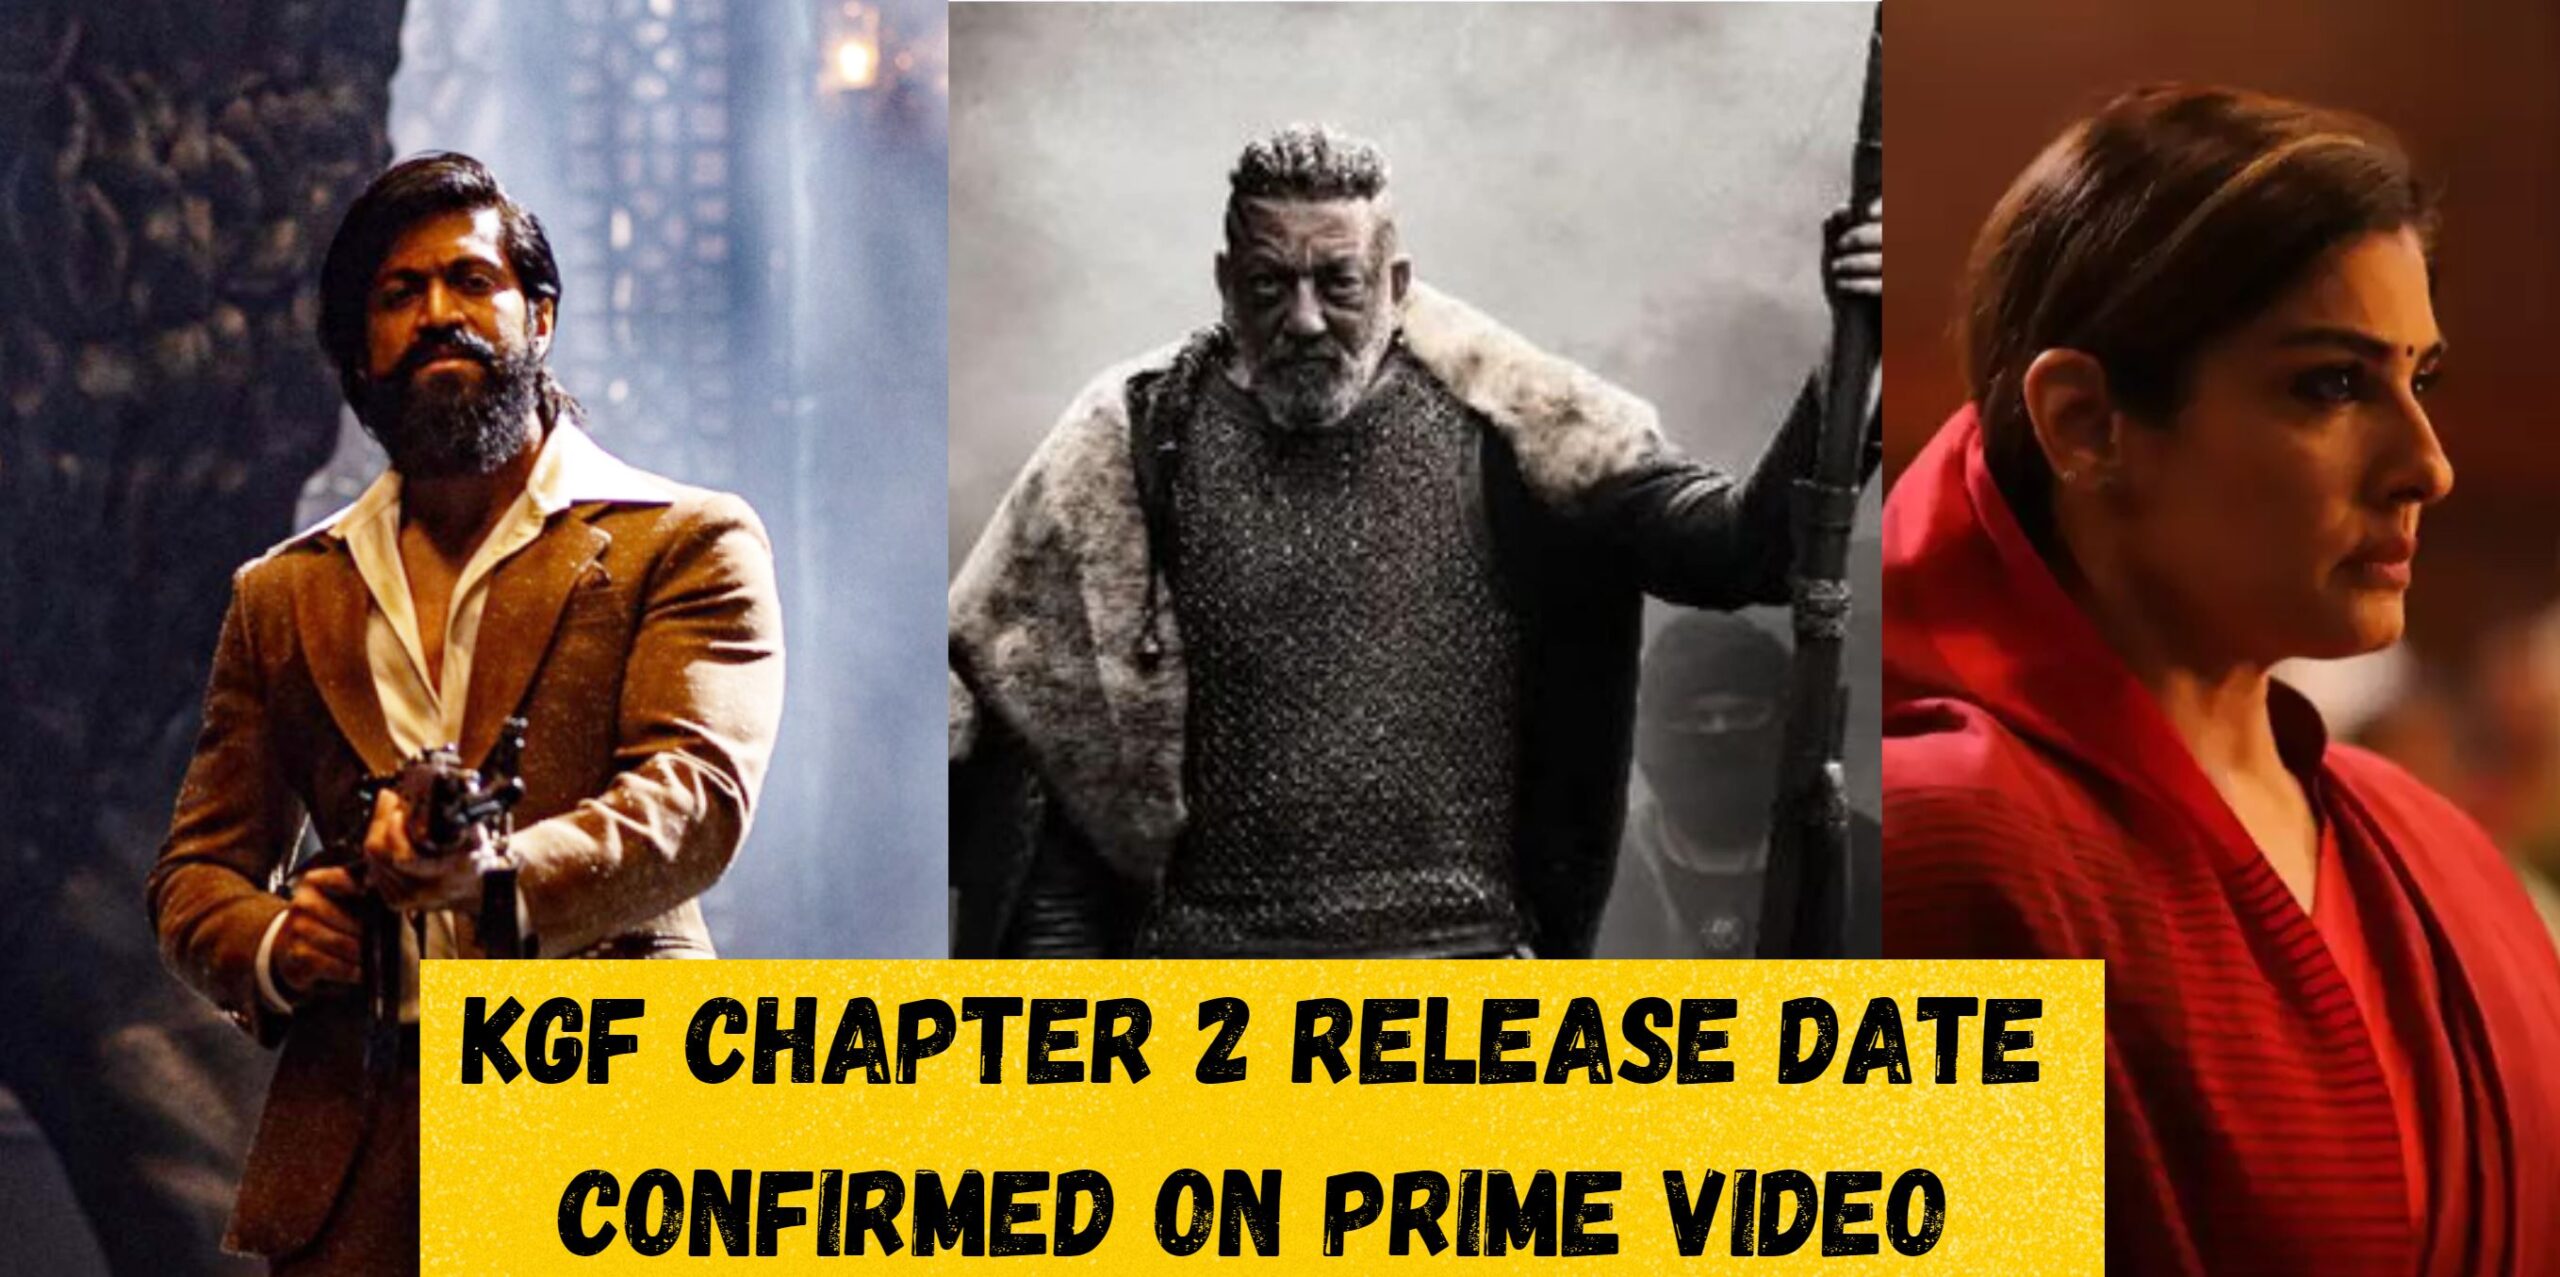 KGF chapter 2 on prime video